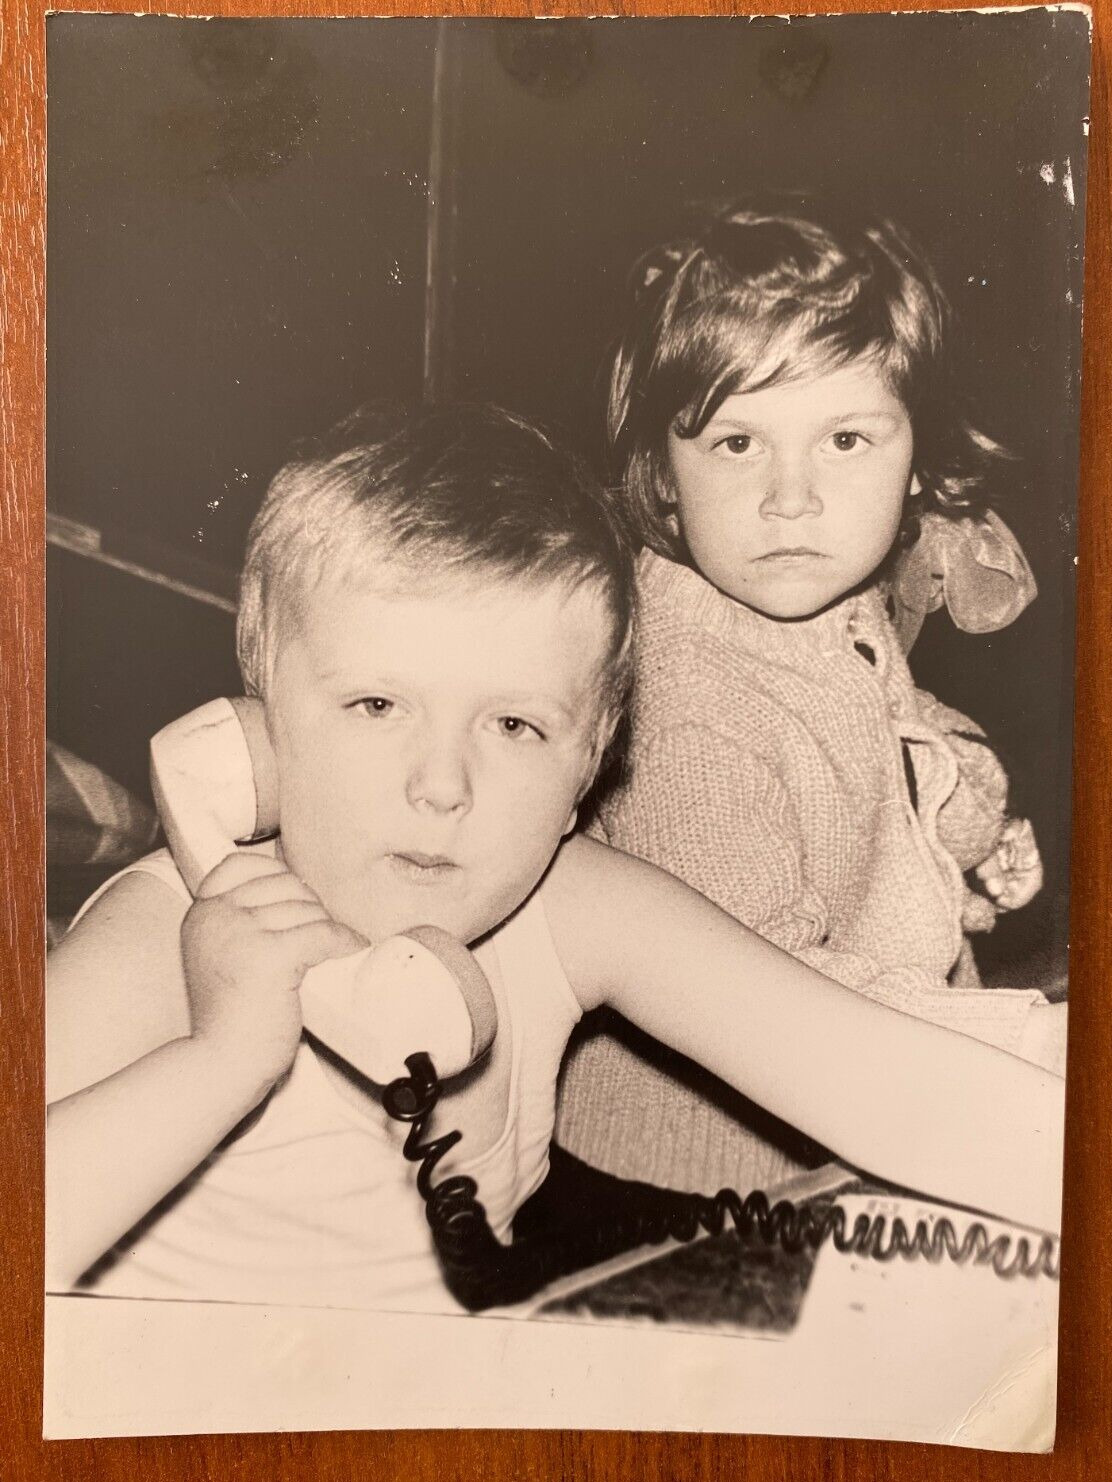 Beautiful boy with a phone and a girl, cute kids Vintage photo